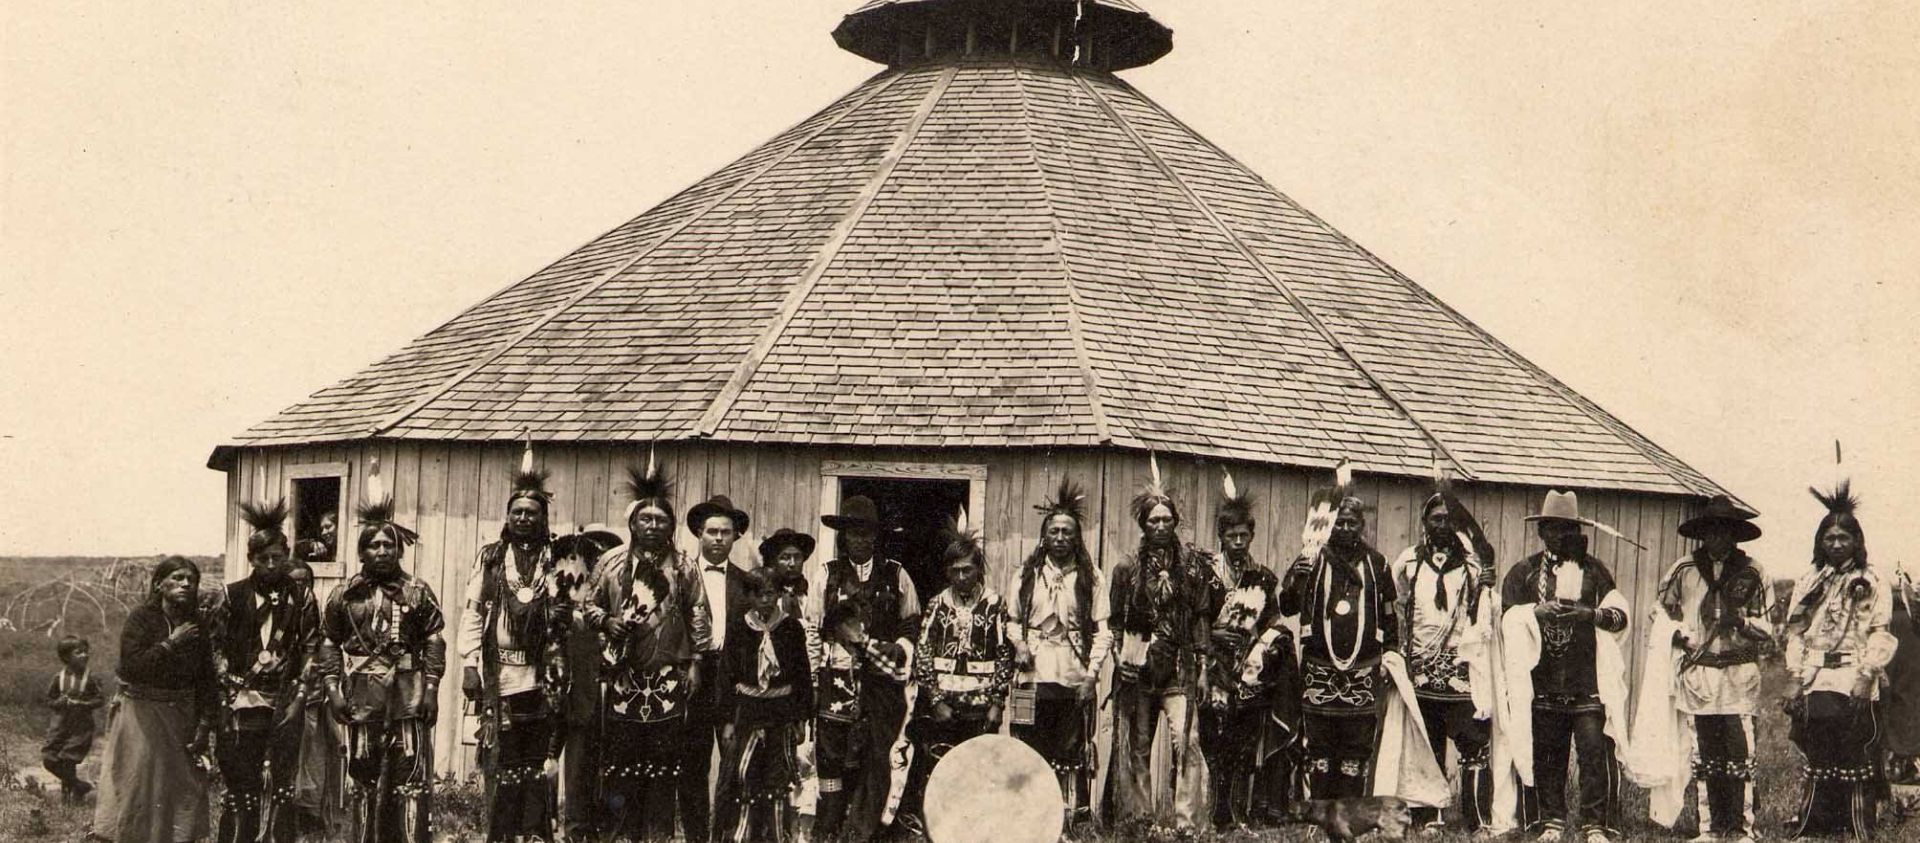 The Inlonshka, has been an important part of Osage life since 1884. The four-day ceremony is celebrated in each Osage district every year in June. This photograph by Vince Dillon shows Osage dancers from the Grayhorse district in 1912 in front of the old roundhouse.